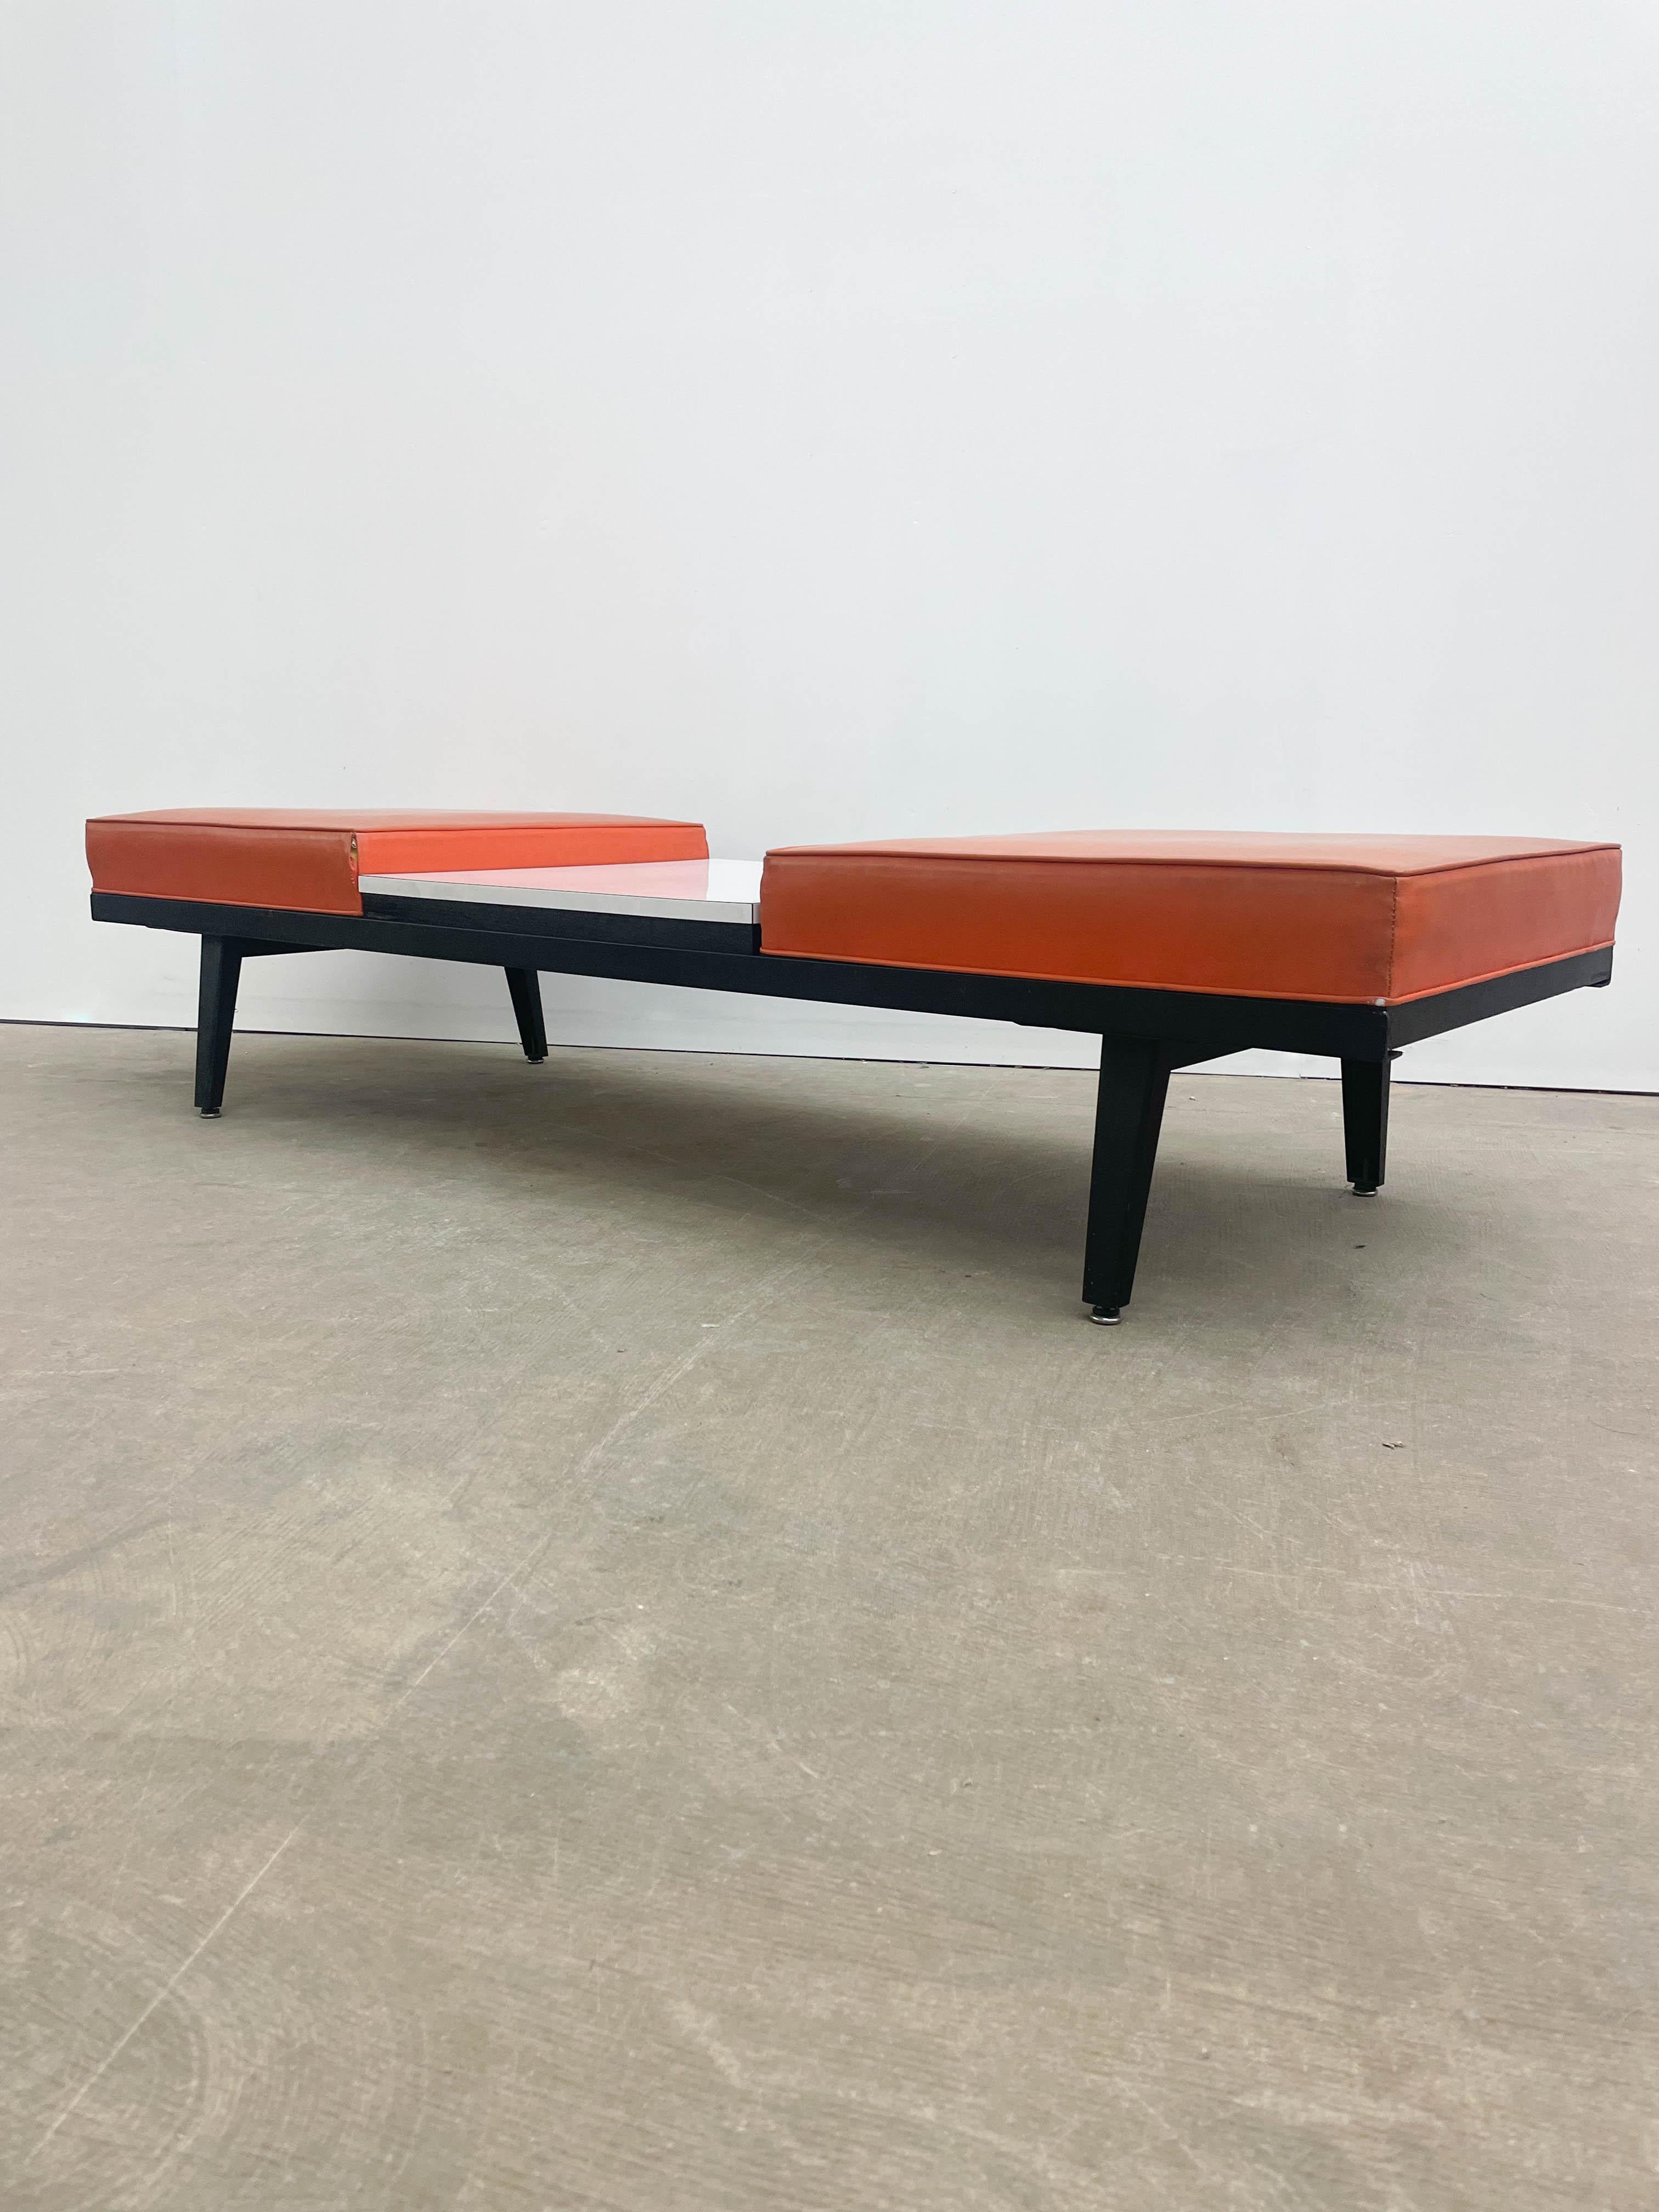 This piece is part of the George Nelson Steelframe series from the early 1950s, made by Herman Miller. The set consists of a three-module Steelframe bench with a pair of flat foam seating modules and one Formica-topped table module. The upholstery